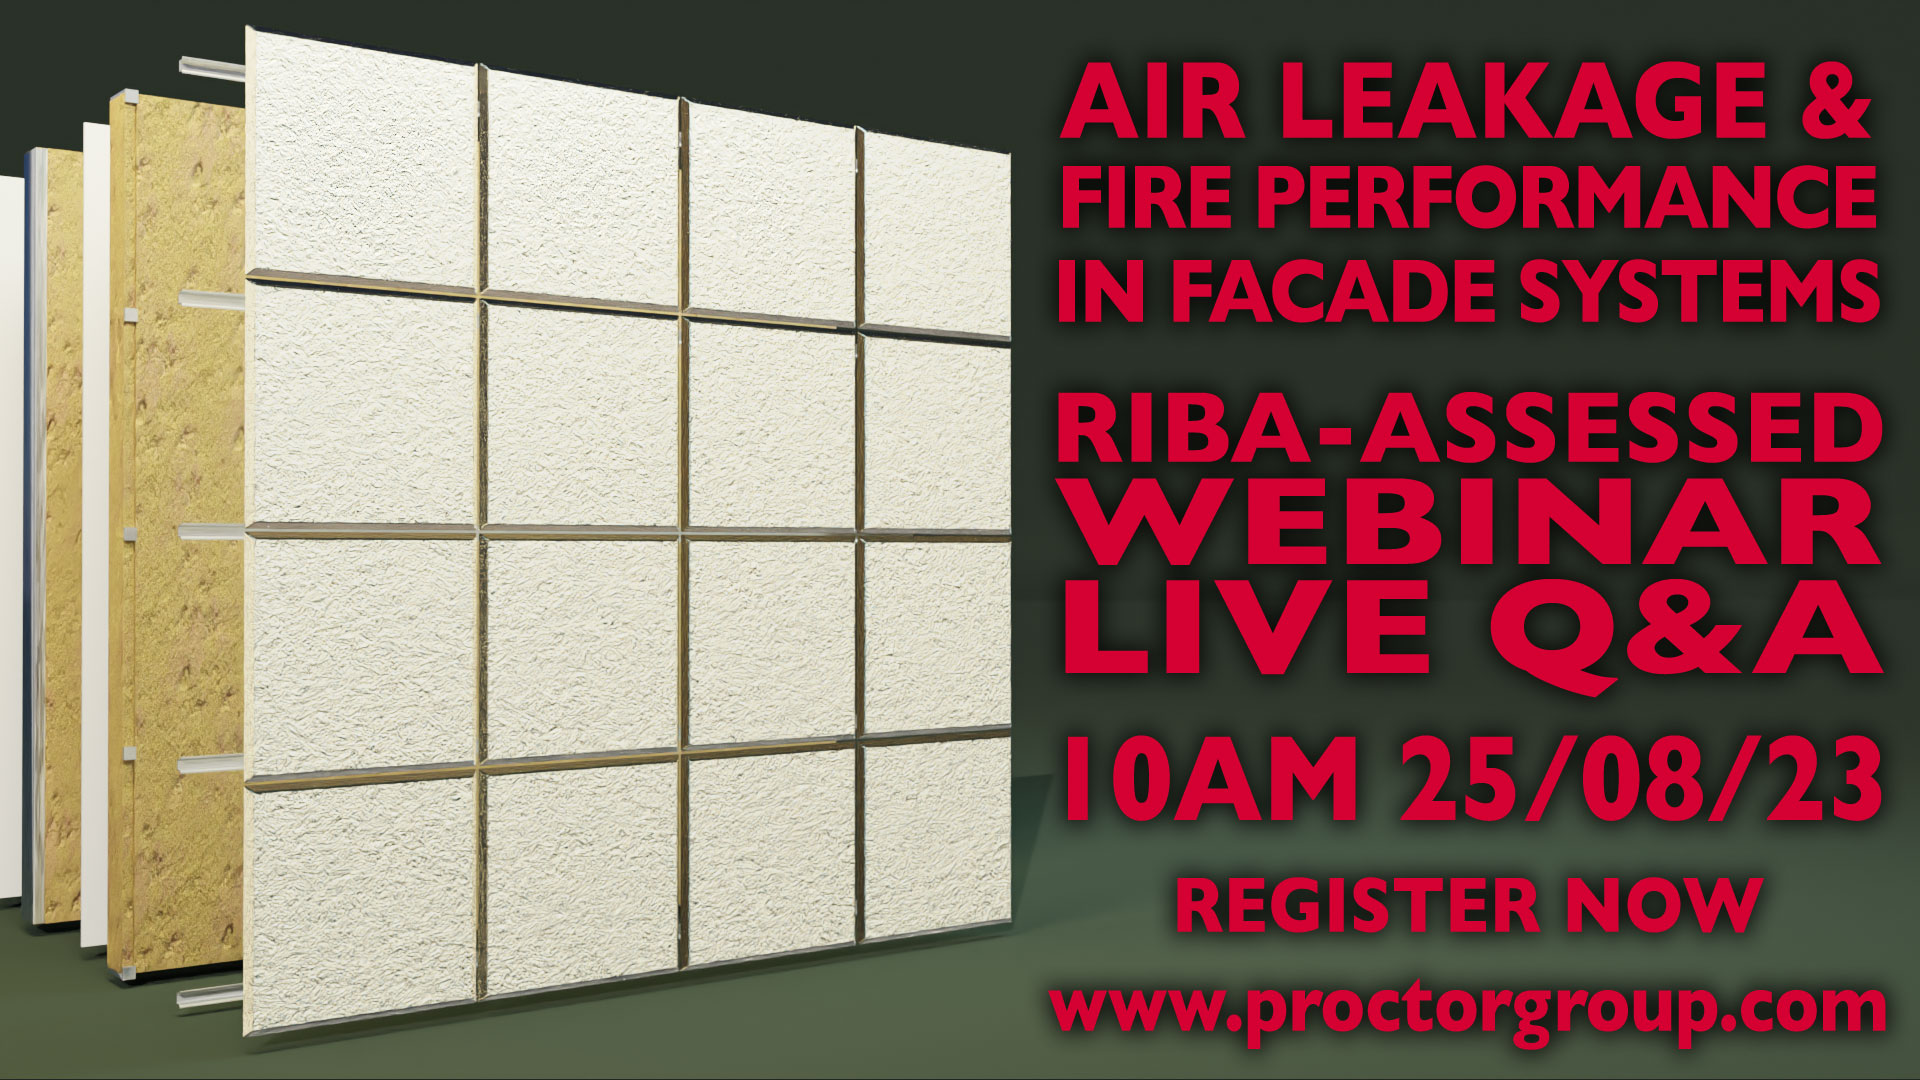 This RIBA-assessed webinar aims to provide an overview of UK and Irish building regulations relating to the compliance of construction membranes, with respect to air leakage and reaction to fire. It will cover adjacent issues of moisture control and hygrothermal assessment, and the implications of air leakage strategies on both energy efficiency and "as designed" vs "as-built" performance.